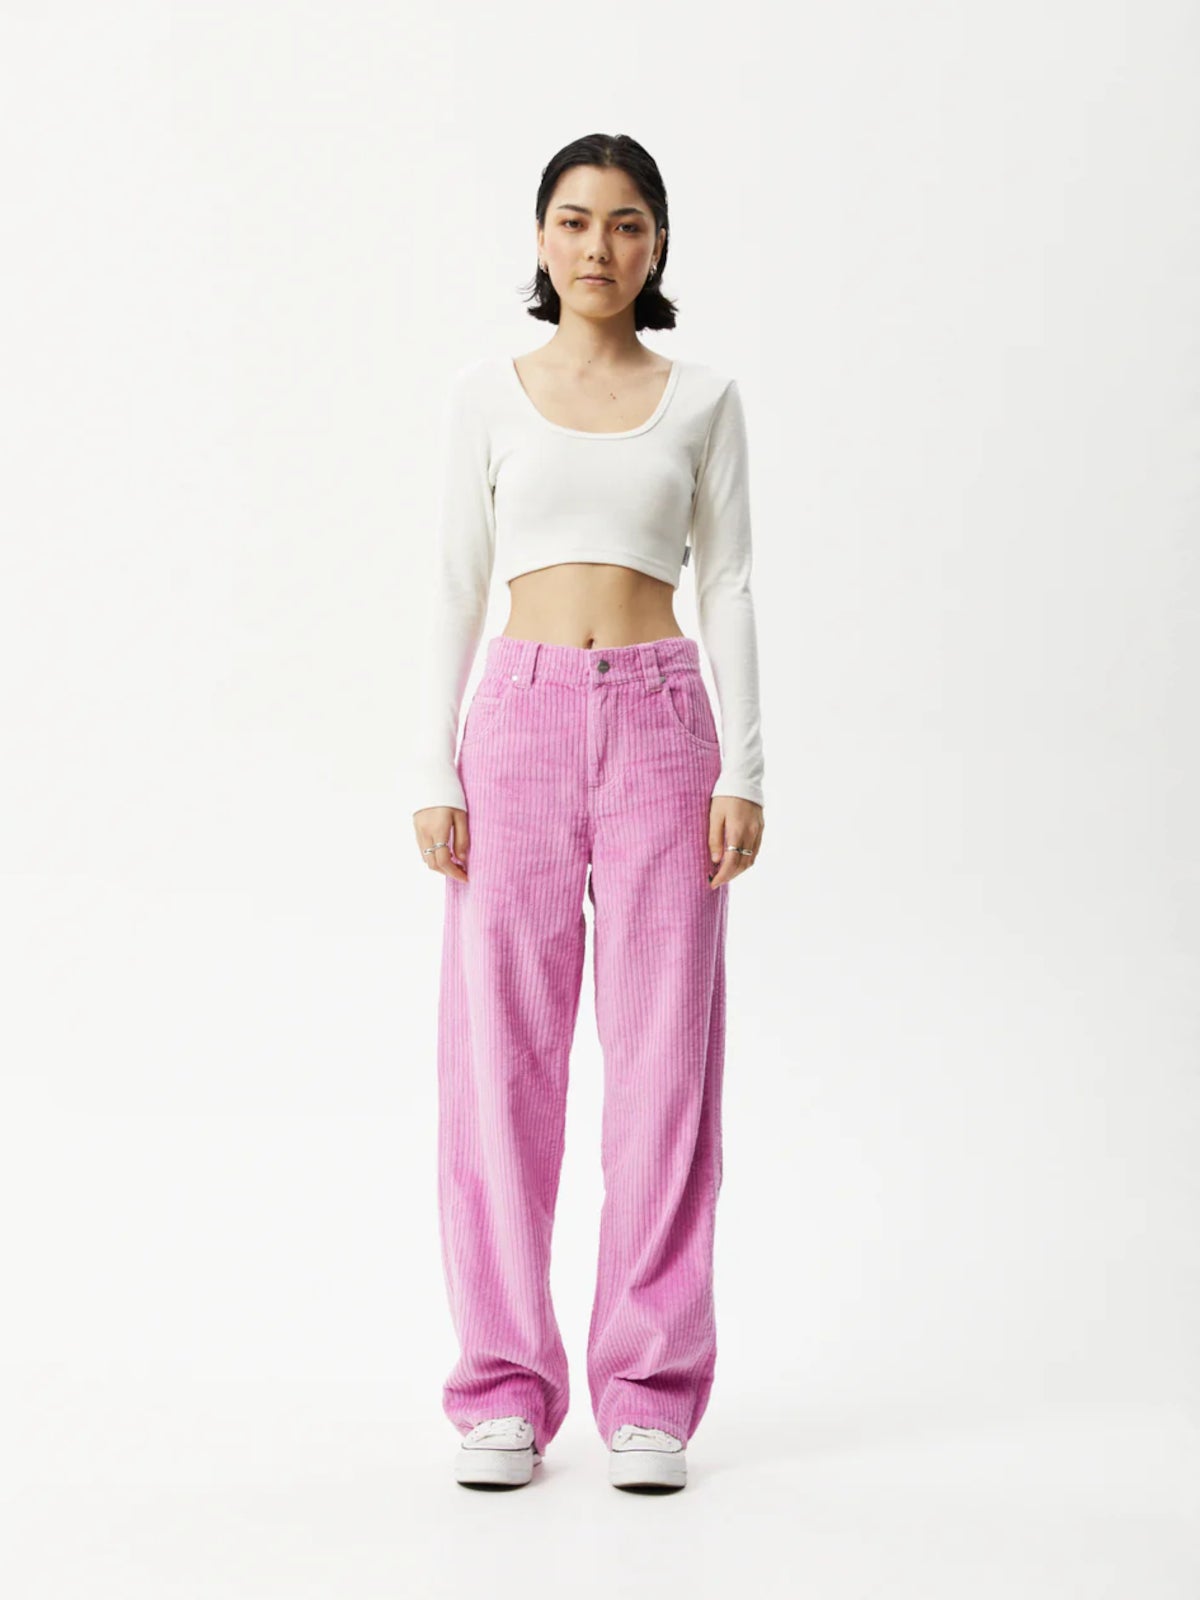 https://www.cosmicnz.co.nz/content/products/day-dream-organic-hemp-corduroy-slouch-pants-candy-image-1-71142.jpg